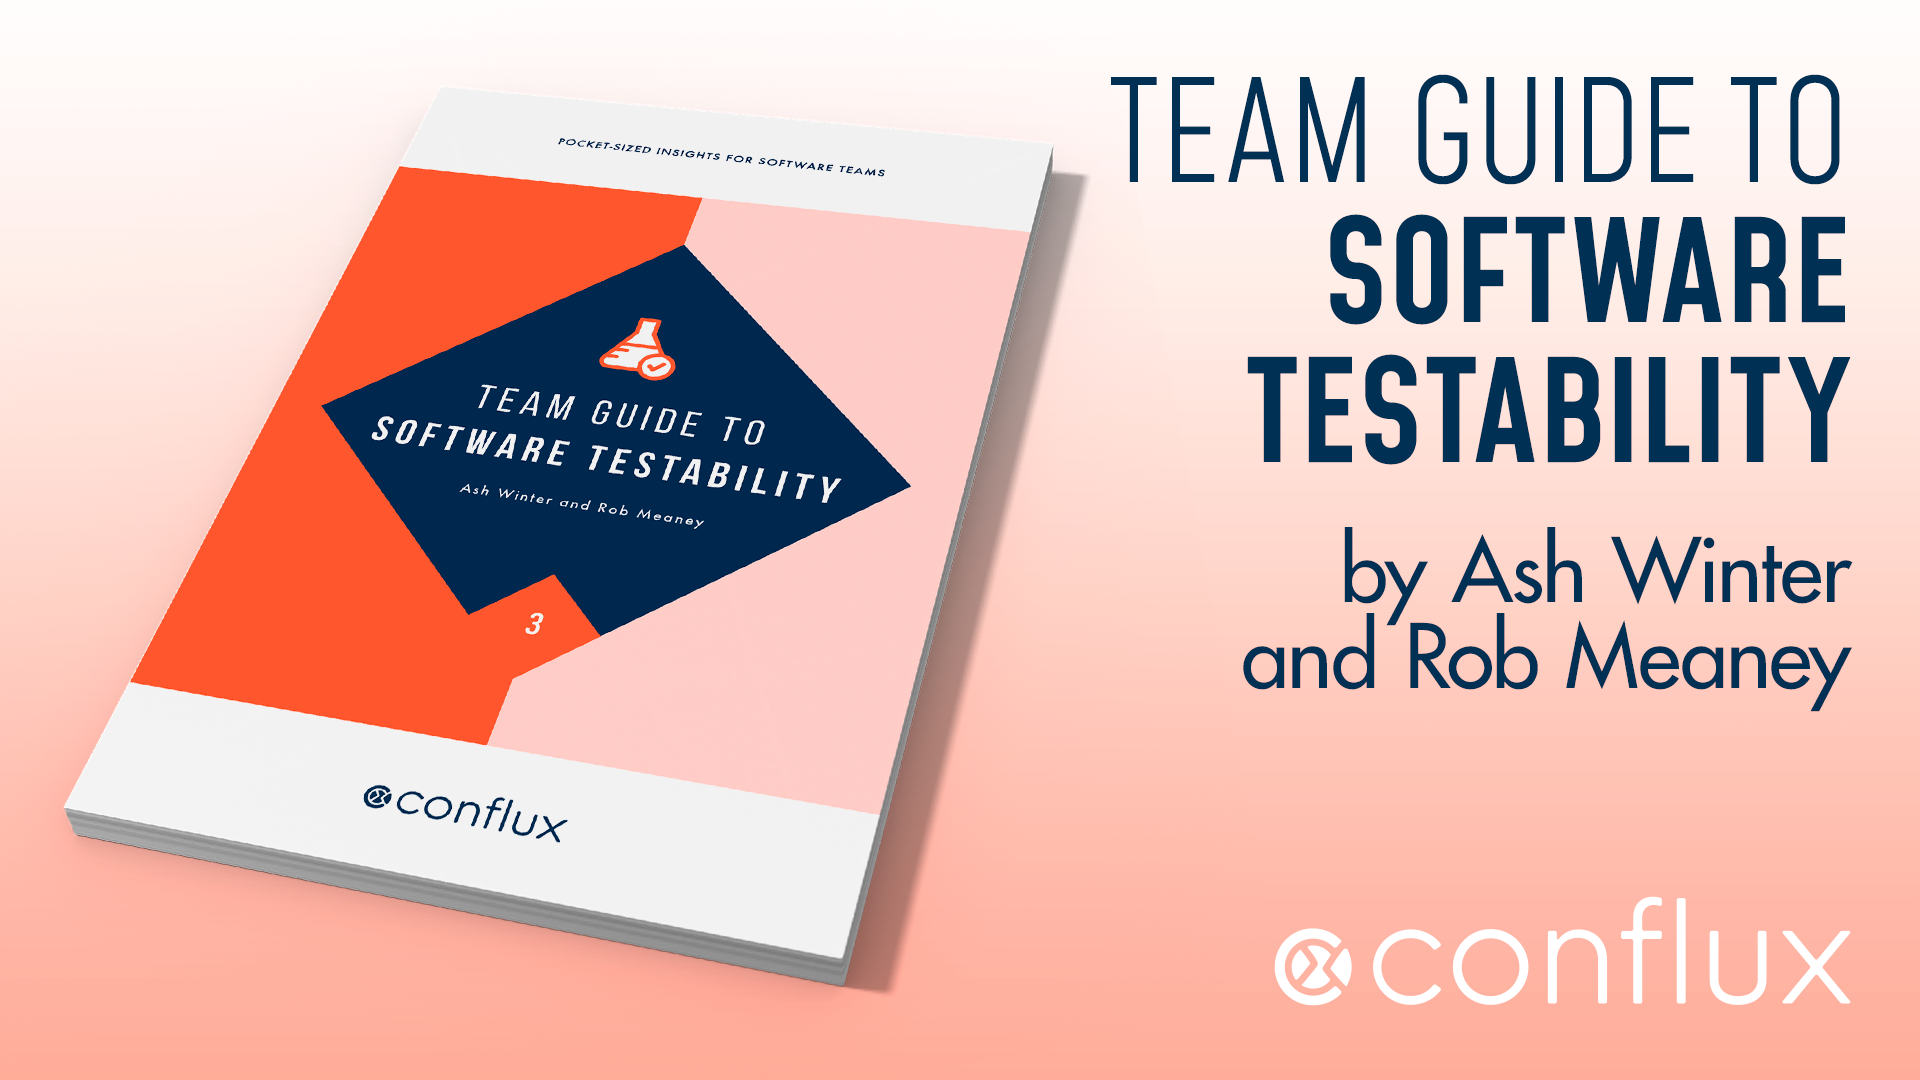 Design software that evolves with changing demands — adapt with confidence through TESTABILITY